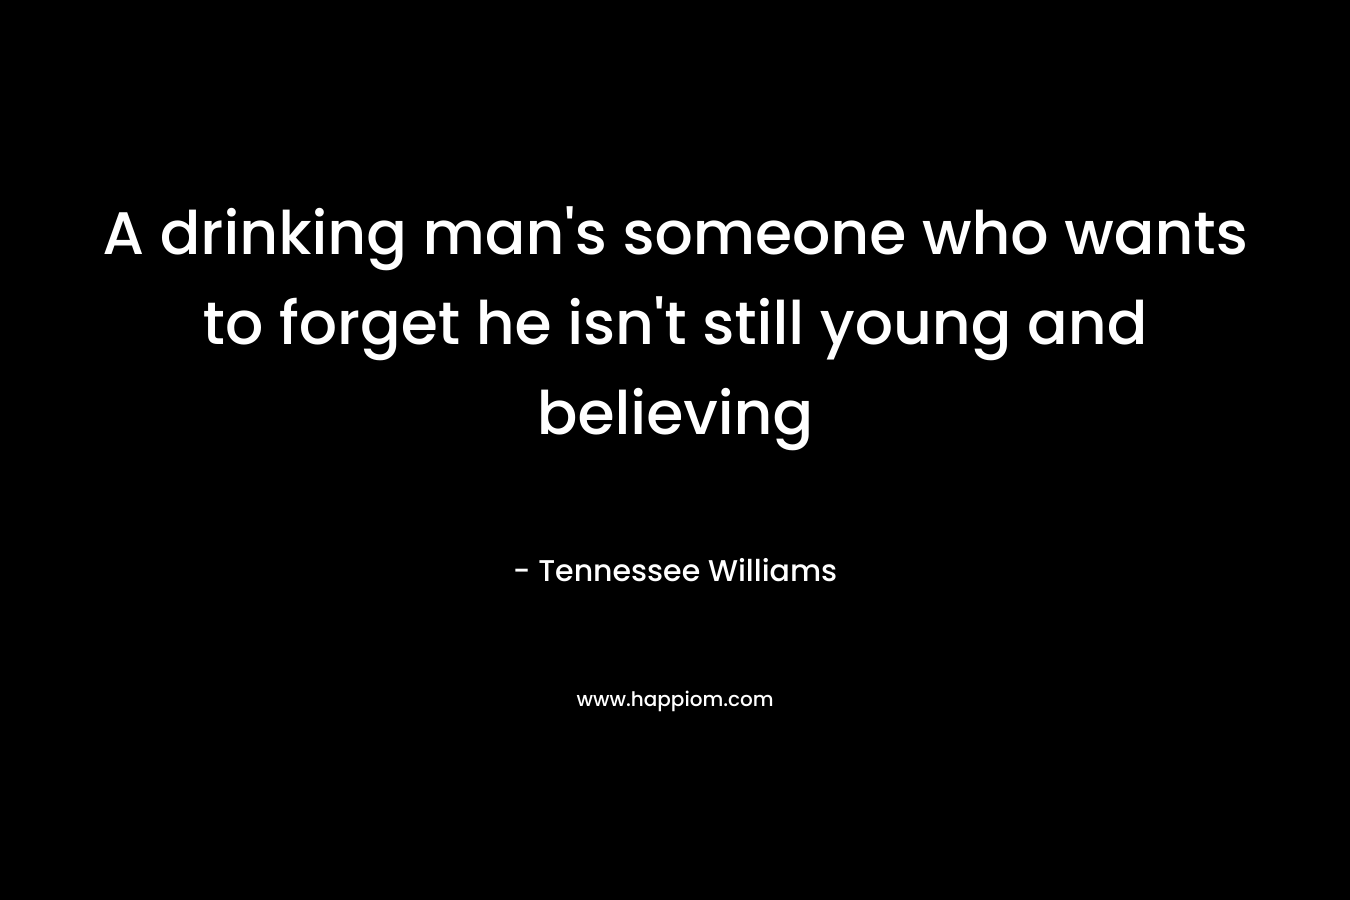 A drinking man's someone who wants to forget he isn't still young and believing